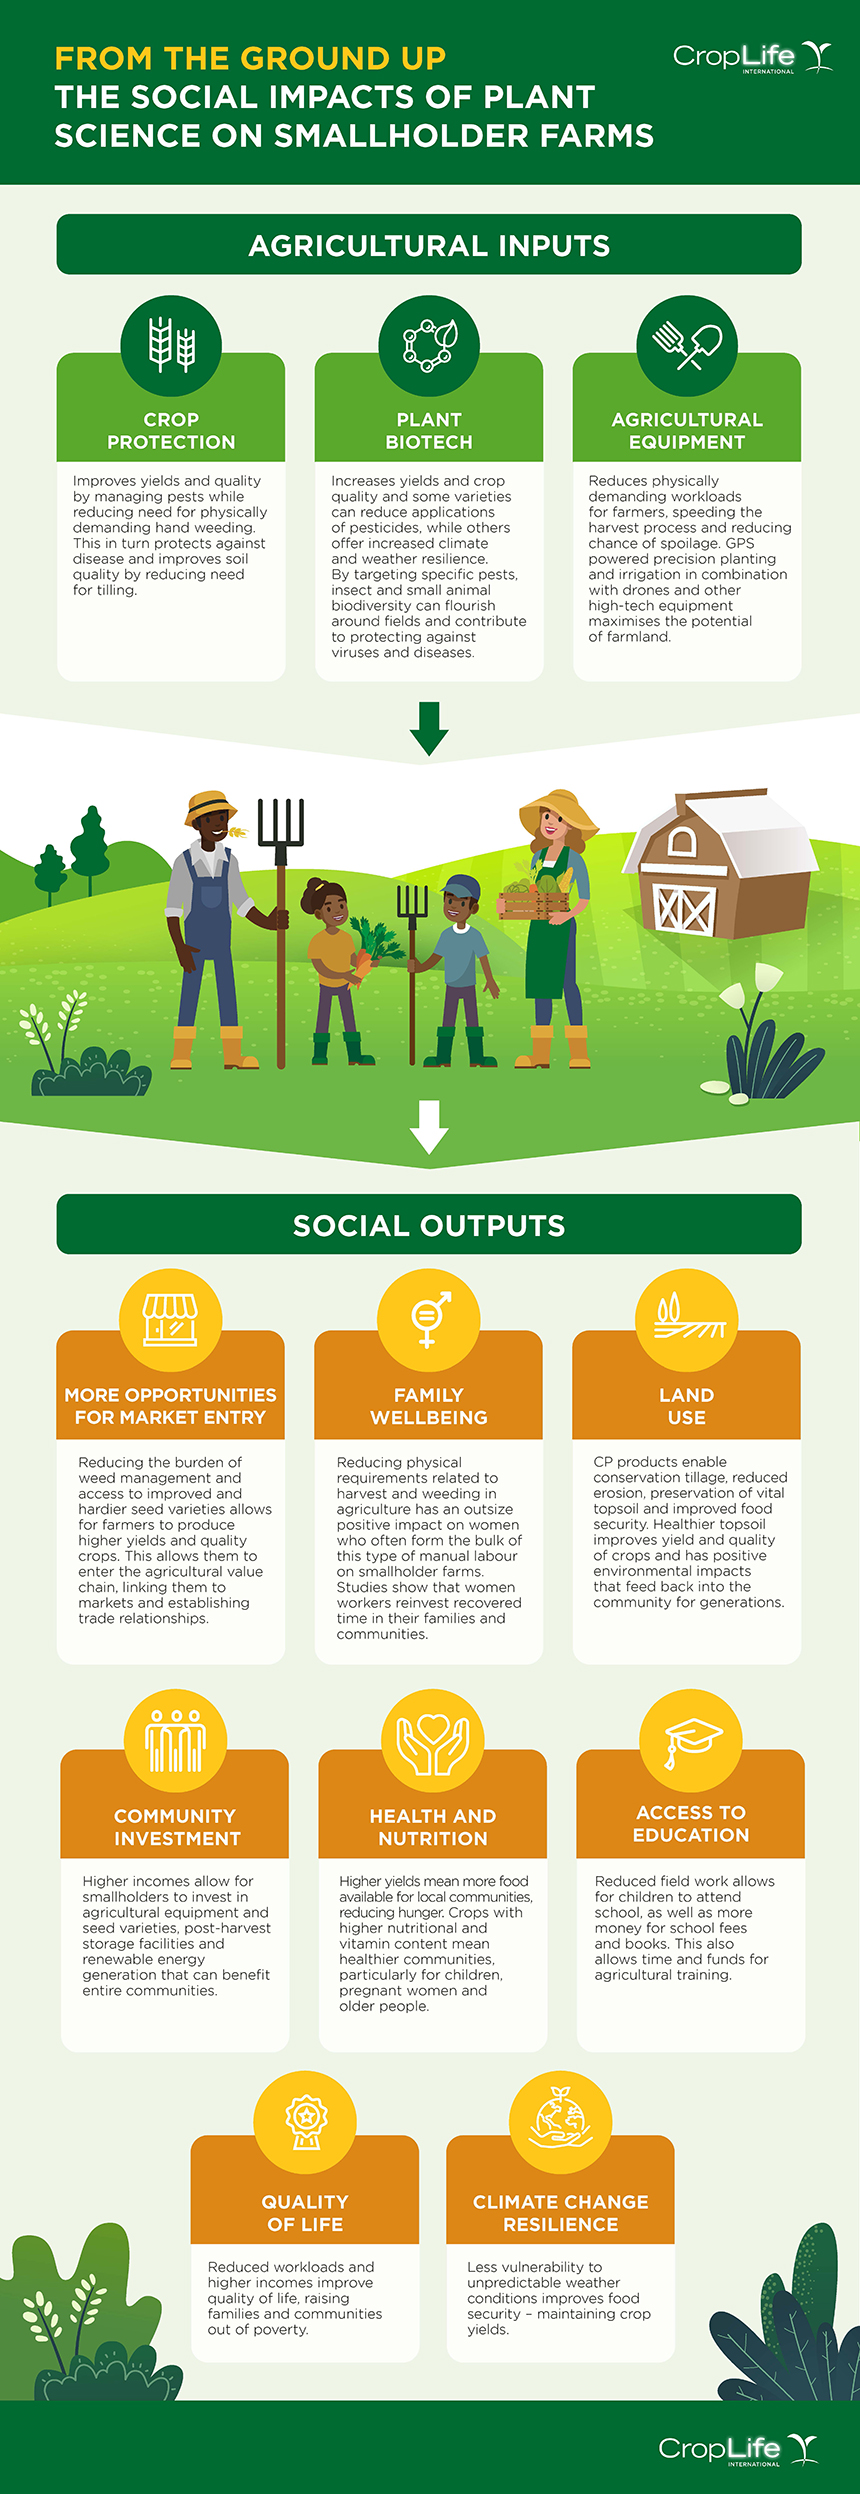 From the Ground Up – the Social Impacts of Plant Science on Smallholder Farms